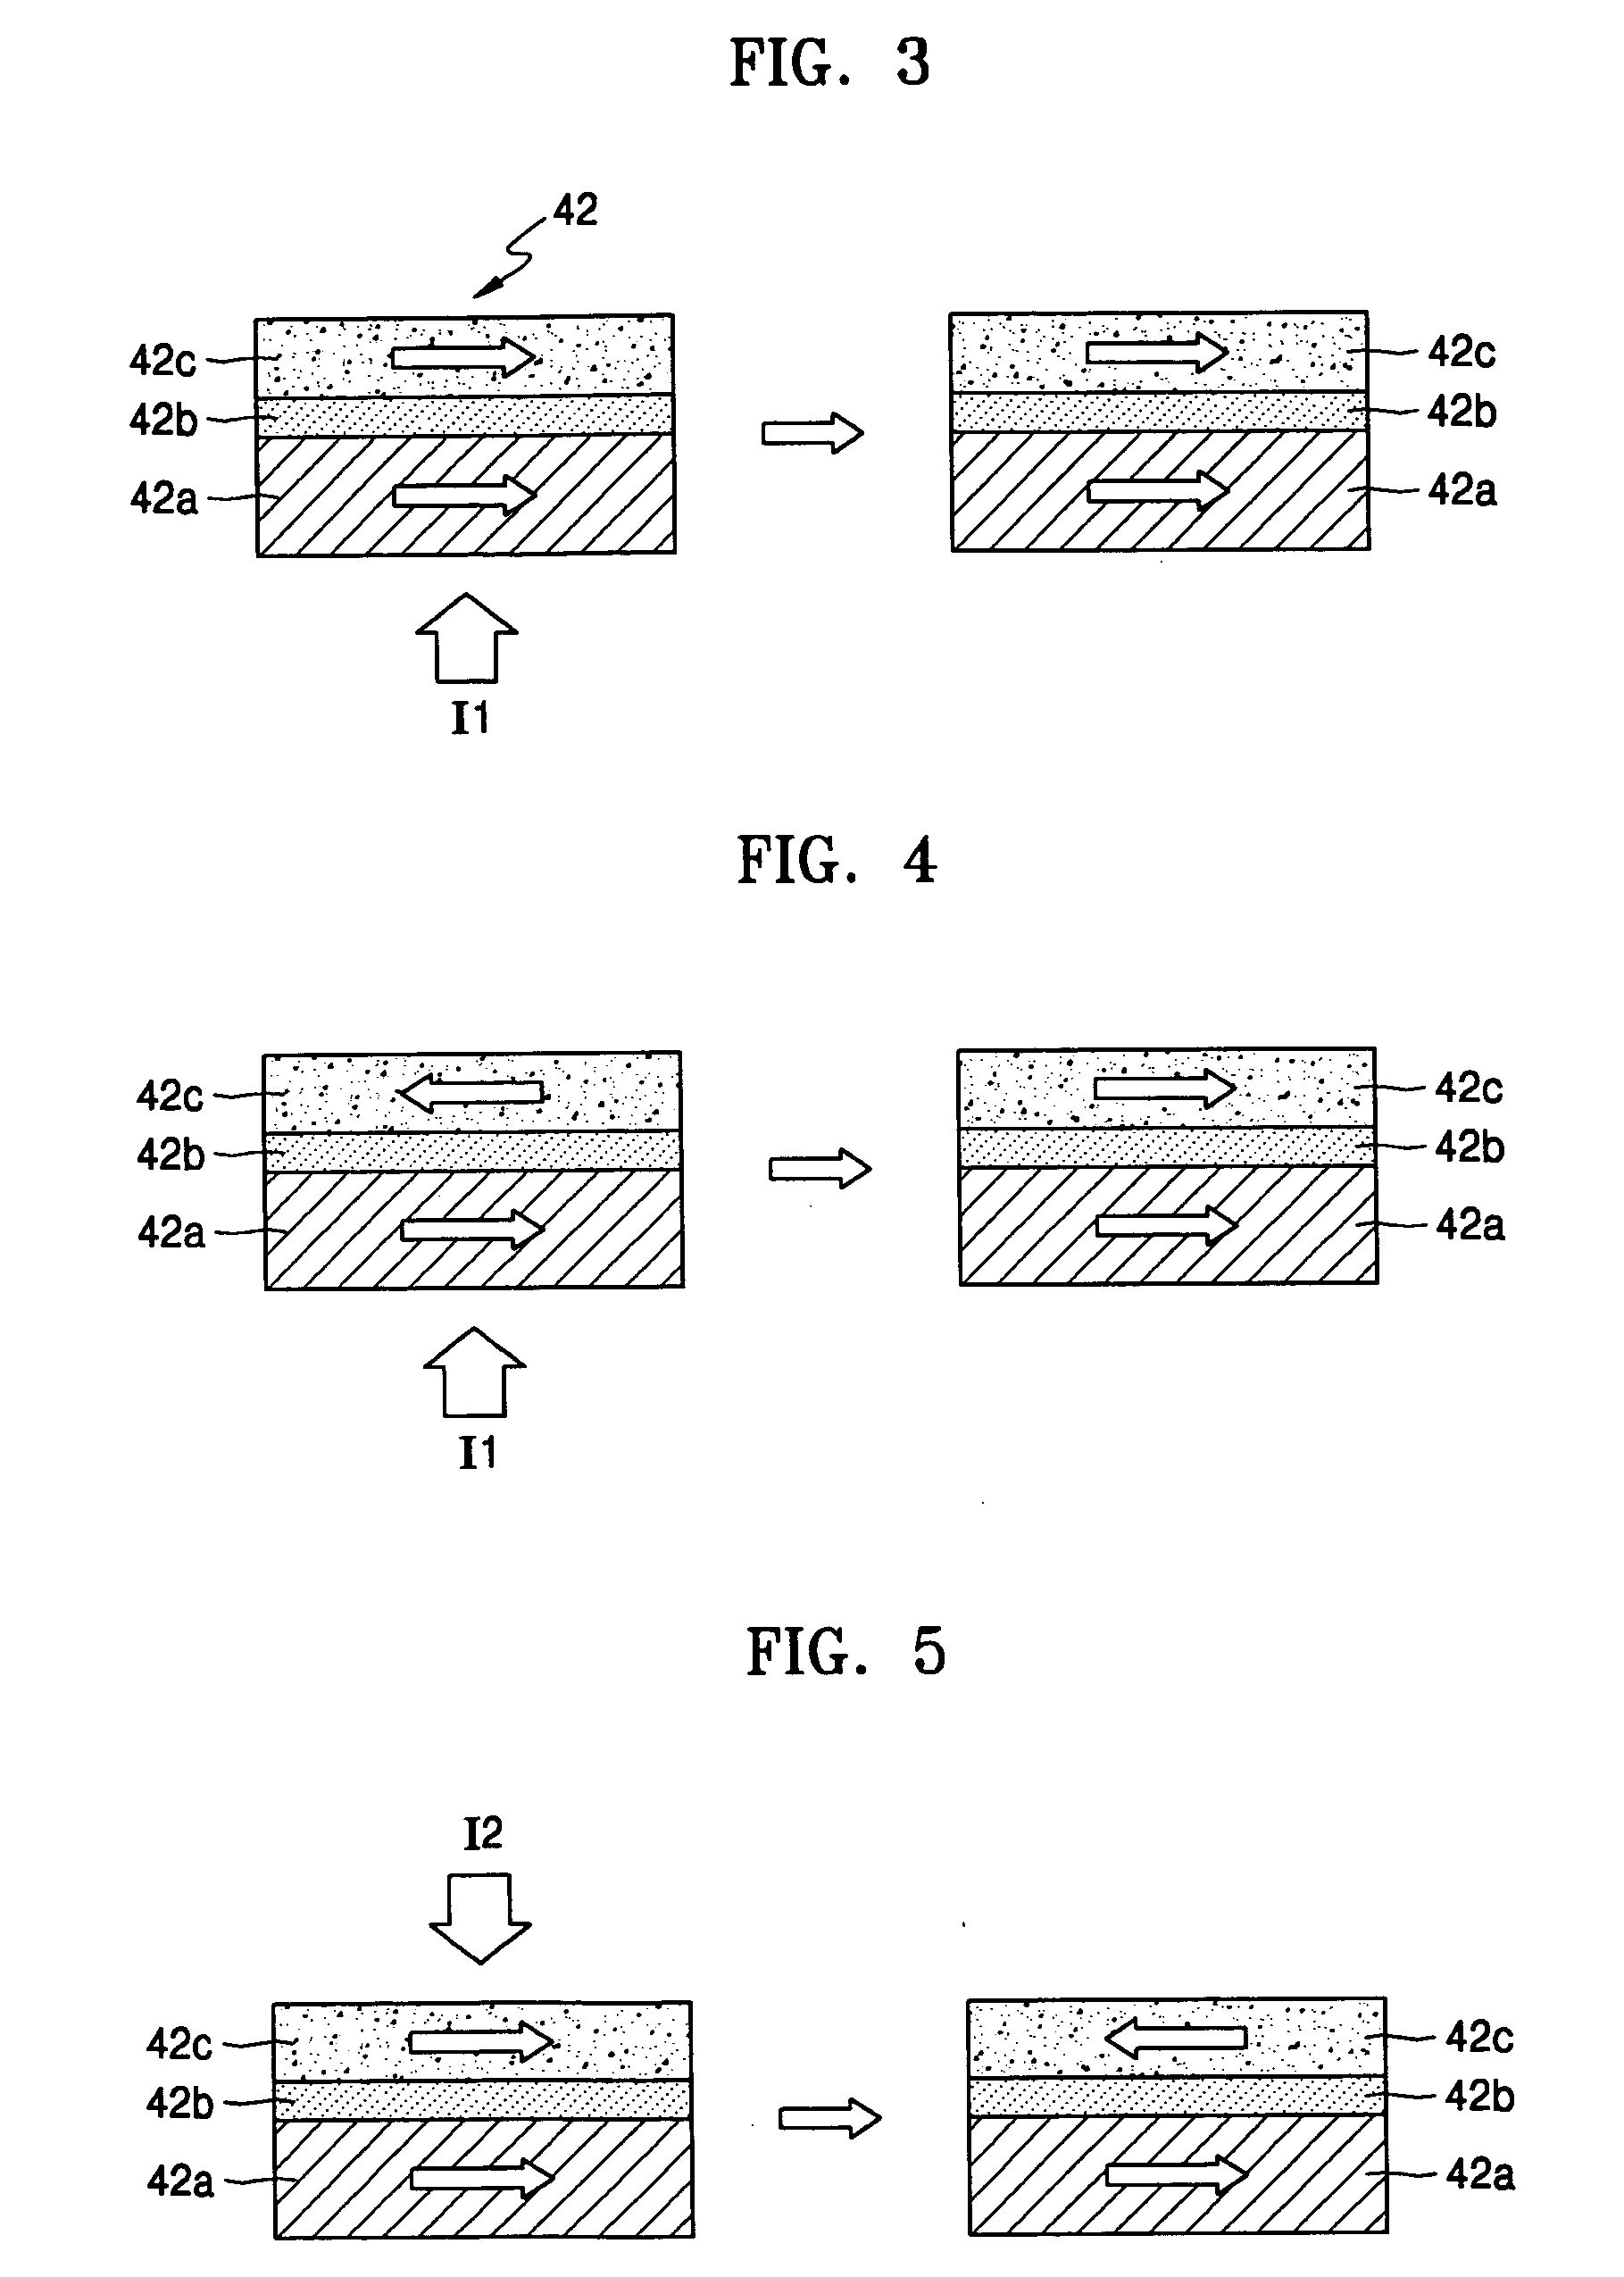 Magnetic logic device and methods of manufacturing and operating the same